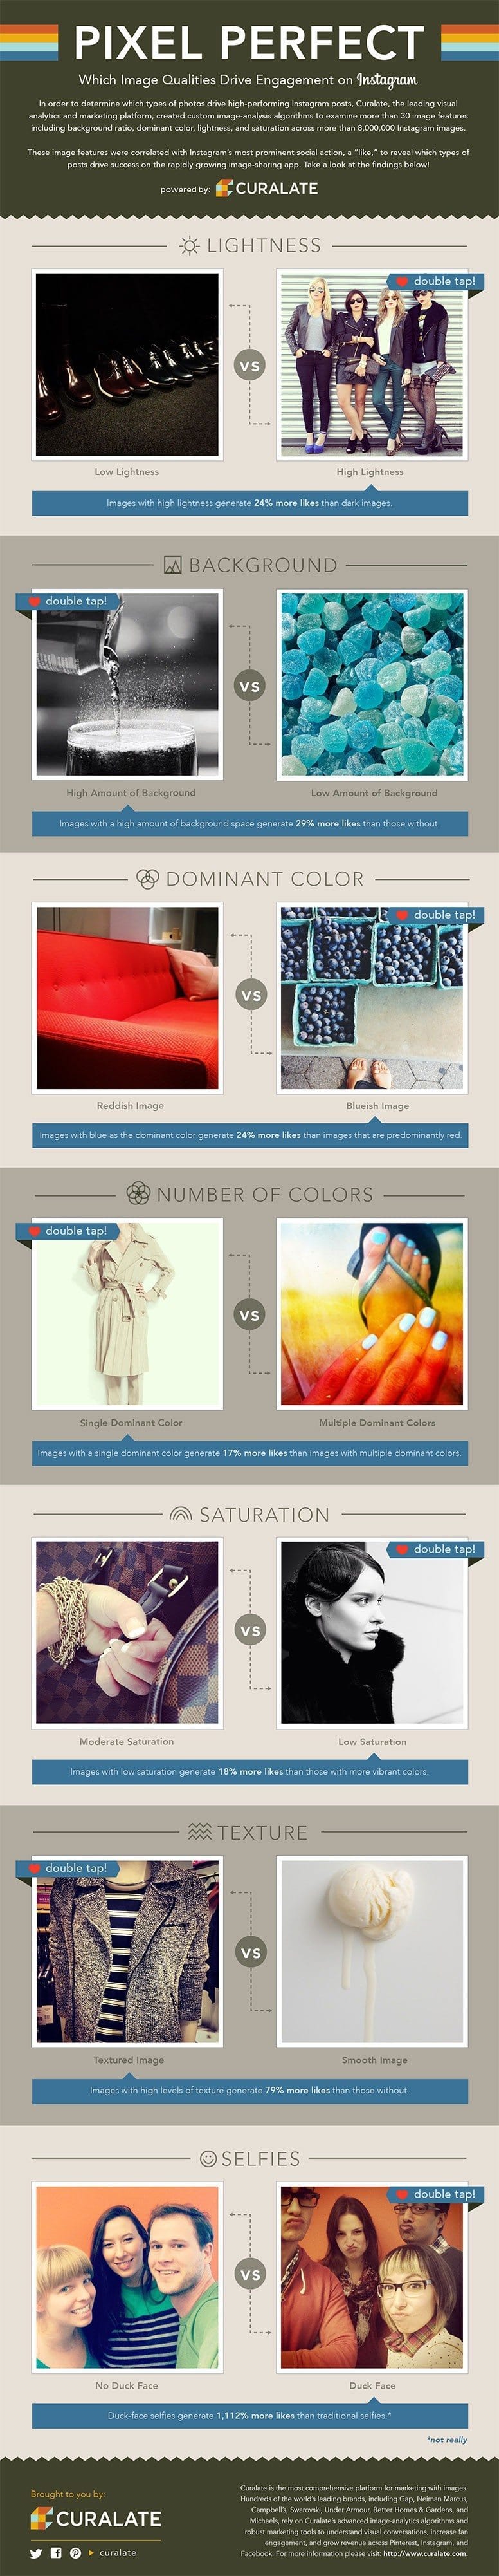 Curalate Infographic - How to Get More Instagram Followers